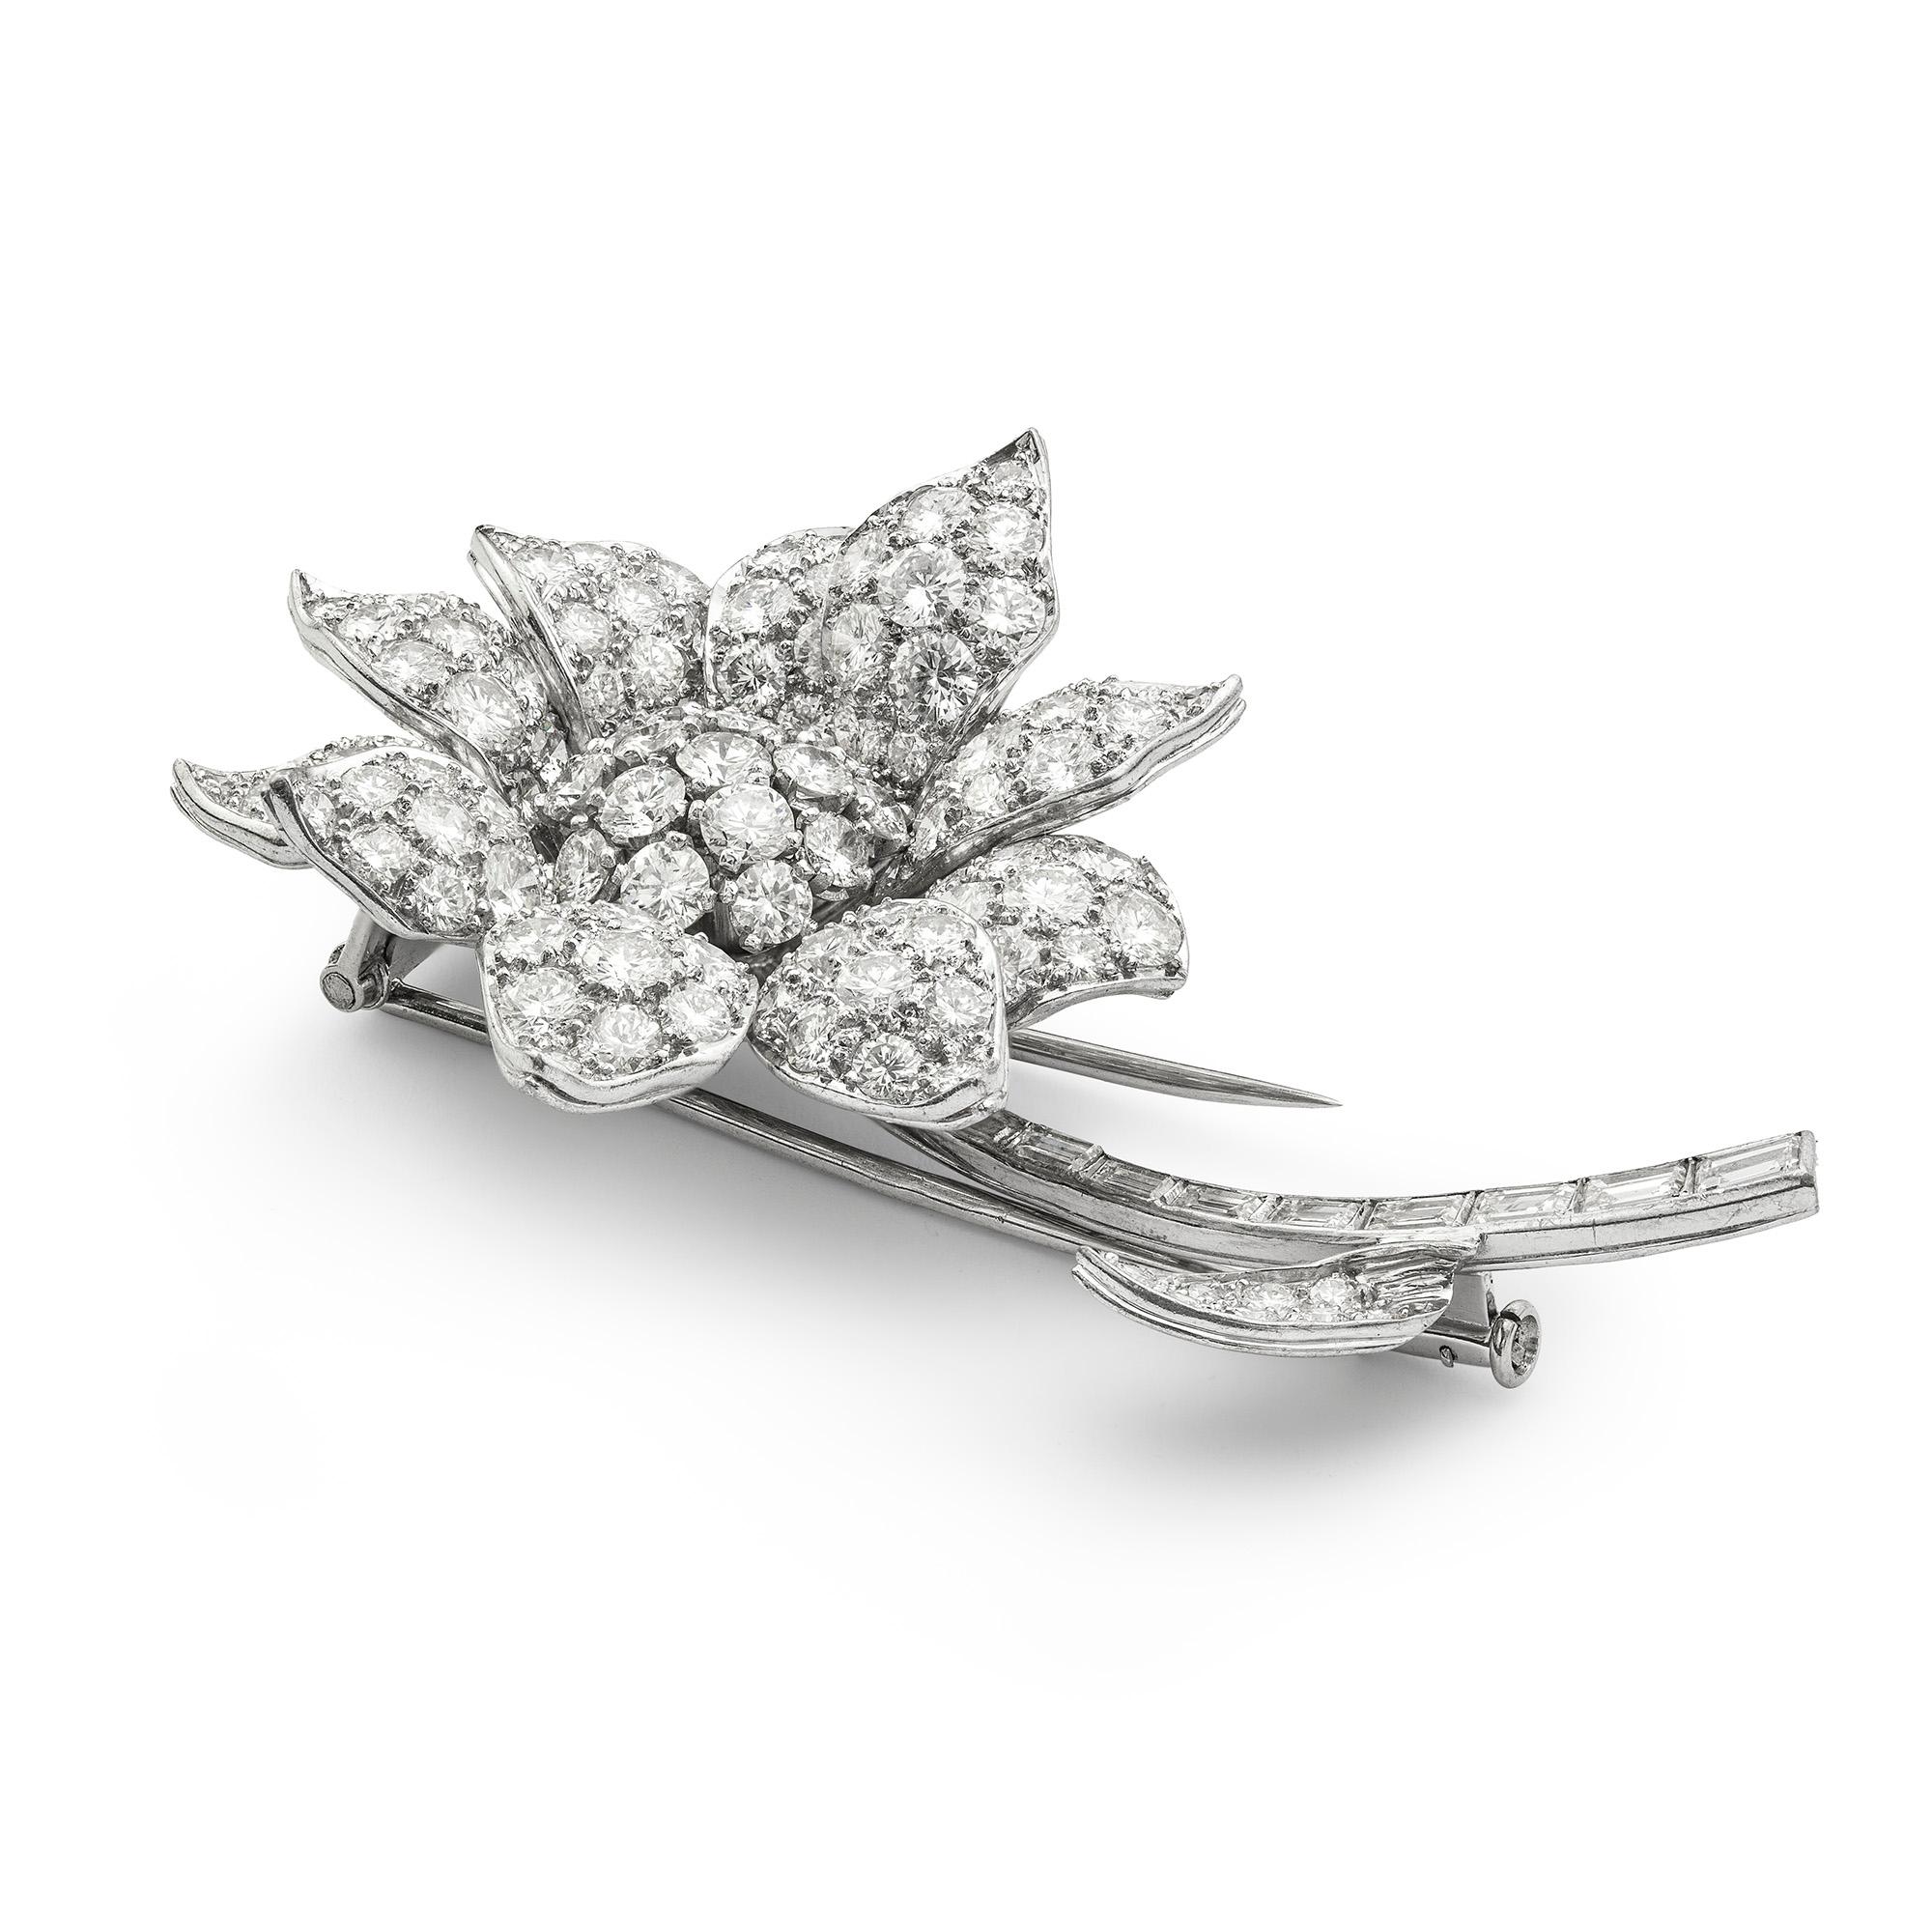 A Vintage diamond-set flower brooch, the centre stamen set as a cluster of round brilliant-cut diamonds surrounded by ten petals set with round brilliant-cut diamonds to a graduated baguette-cut diamonds set stem with diamond-set leaf, estimated